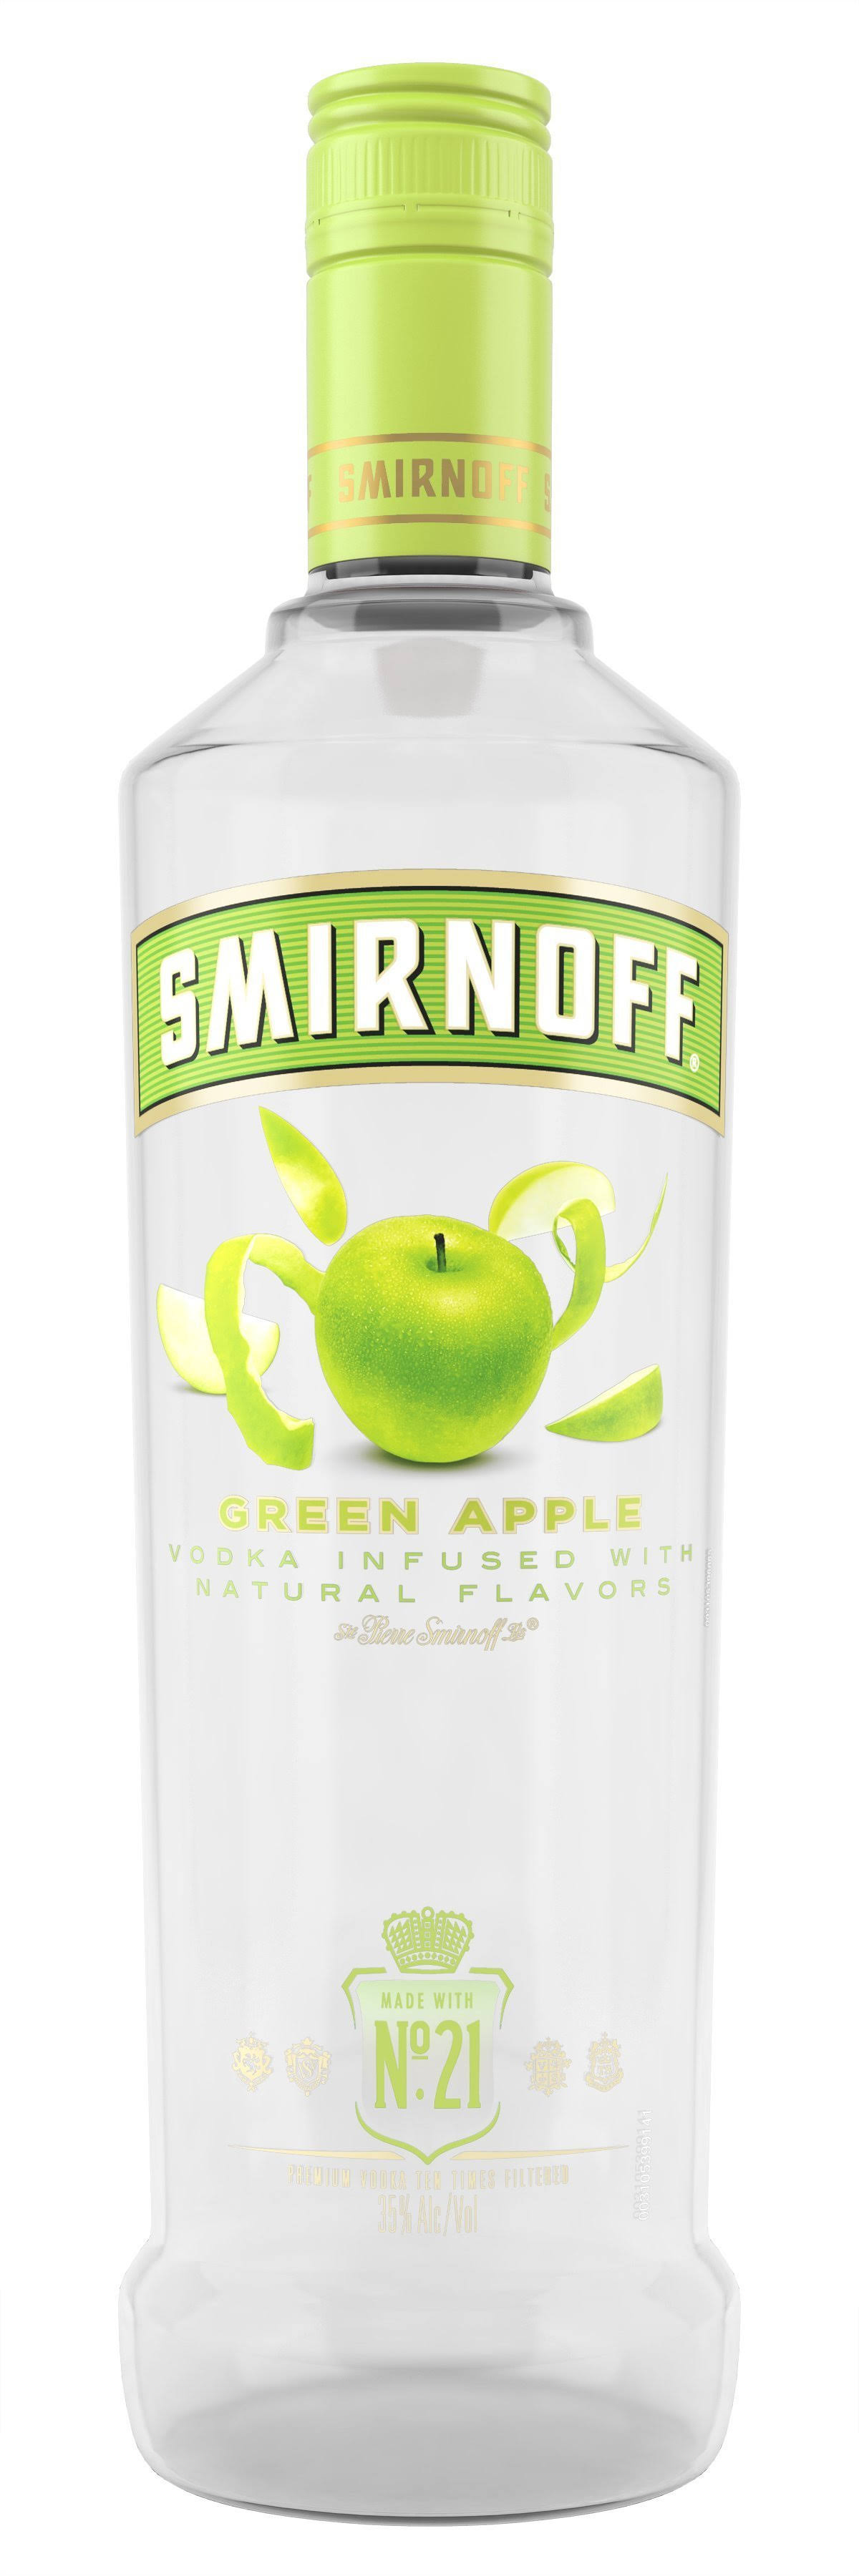 Smirnoff Green Apple 70 Proof Vodka Infused With Natural Flavors